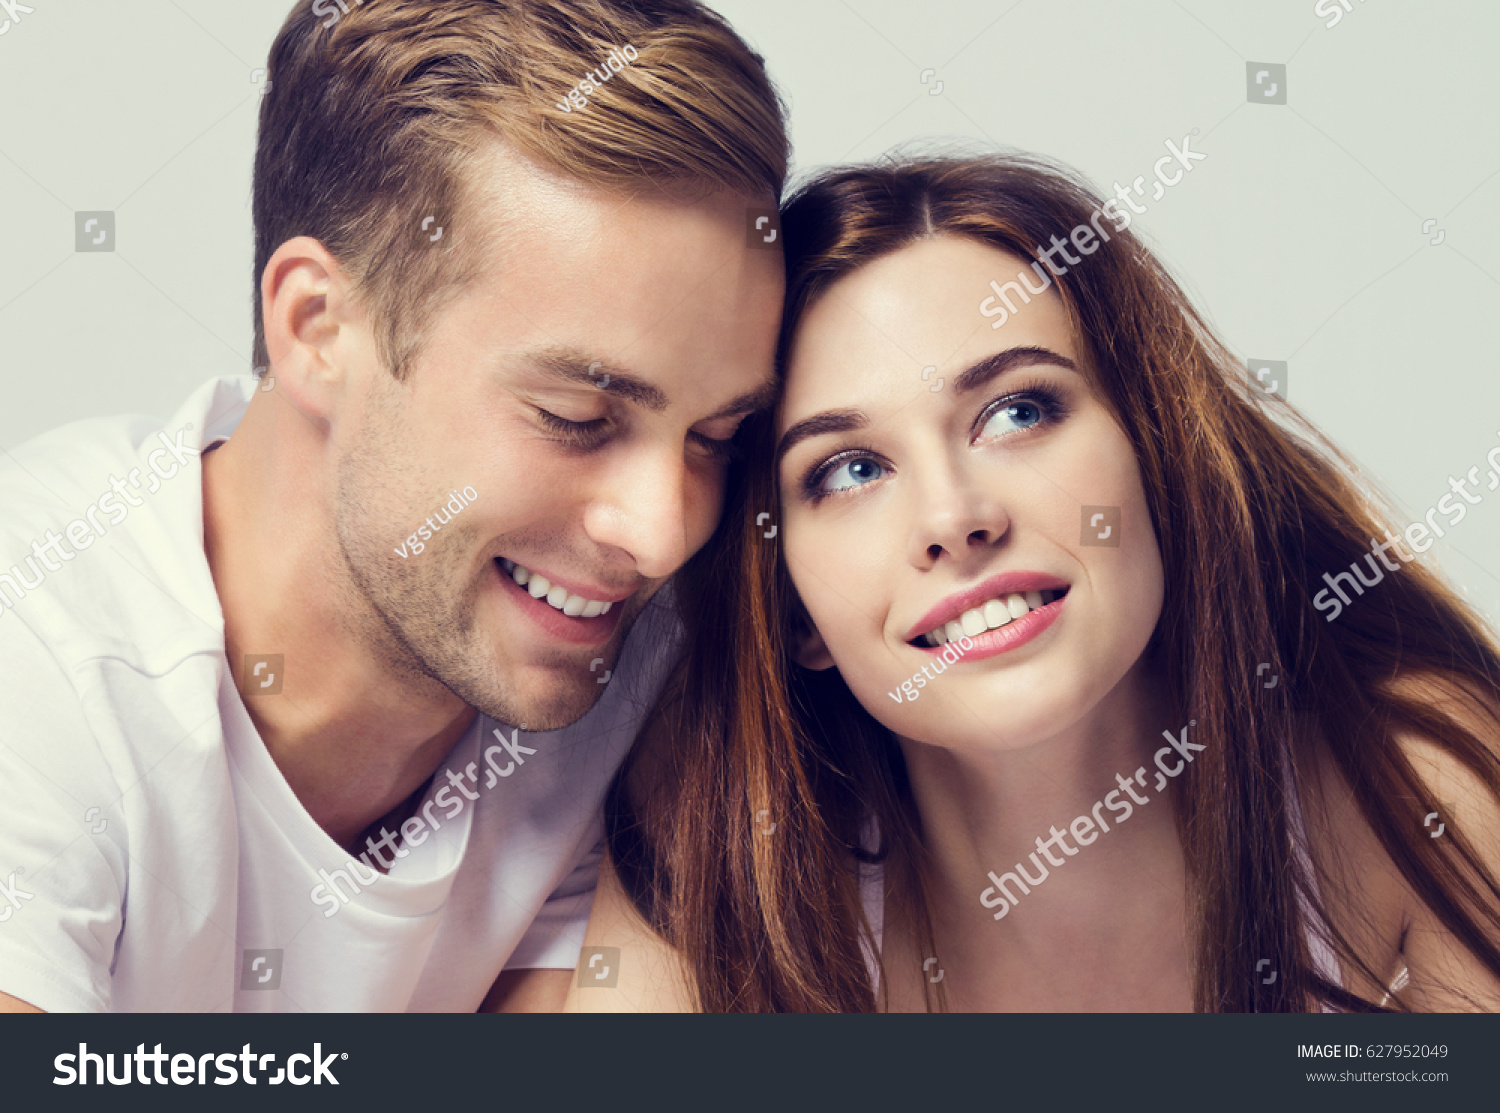 Young couple, looking at you. Caucasian models - love, relationship, dating, happy lovers, concept shot, against grey, with copyspace for slogan or text message.  Horizontal banner composition. #627952049